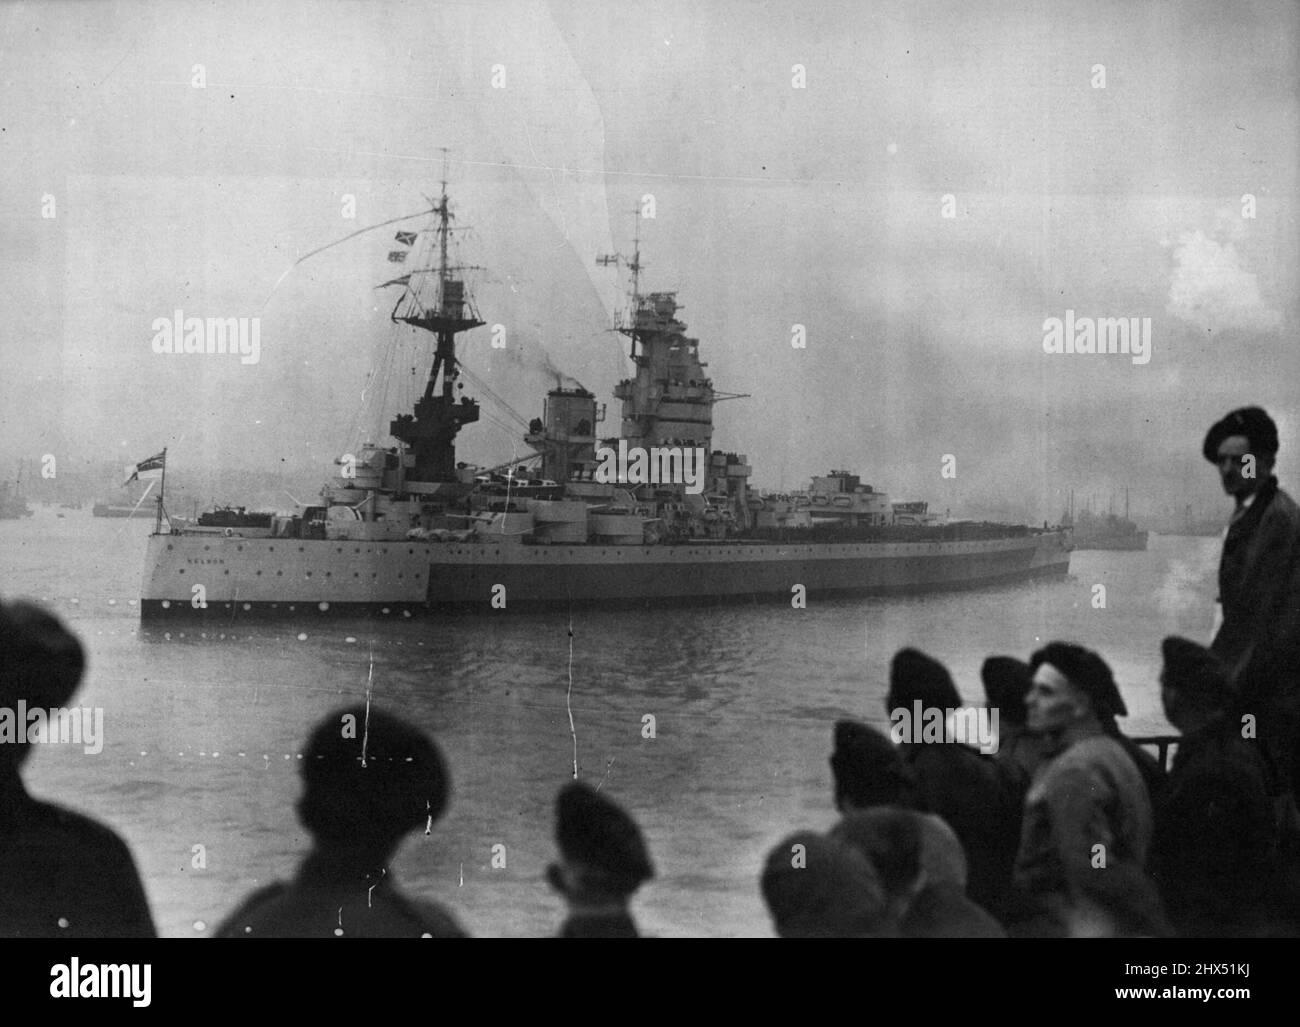 The 'Nelson' Comes Home - Her War Service Over -- H.M.S. Nelson entering Portsmouth Harbour at the end of her long voyageBritain's 16-inch-gun battleship 'Nelson' ended her war service when She arrived in Portsmouth Horbour after an 8,076 miles' voyage from Singapore. In addition to her complement of 1,361 officers and ratings. She has brought home more than 600 army and navy repatriated service menTwo surrenders were signed aboard the 'Nelson' The first was at Malta, where, on September 30th, General Eisenhower. General Alexander and Admiral Sir John Cunningham met to receive from marshal Bad Stock Photo